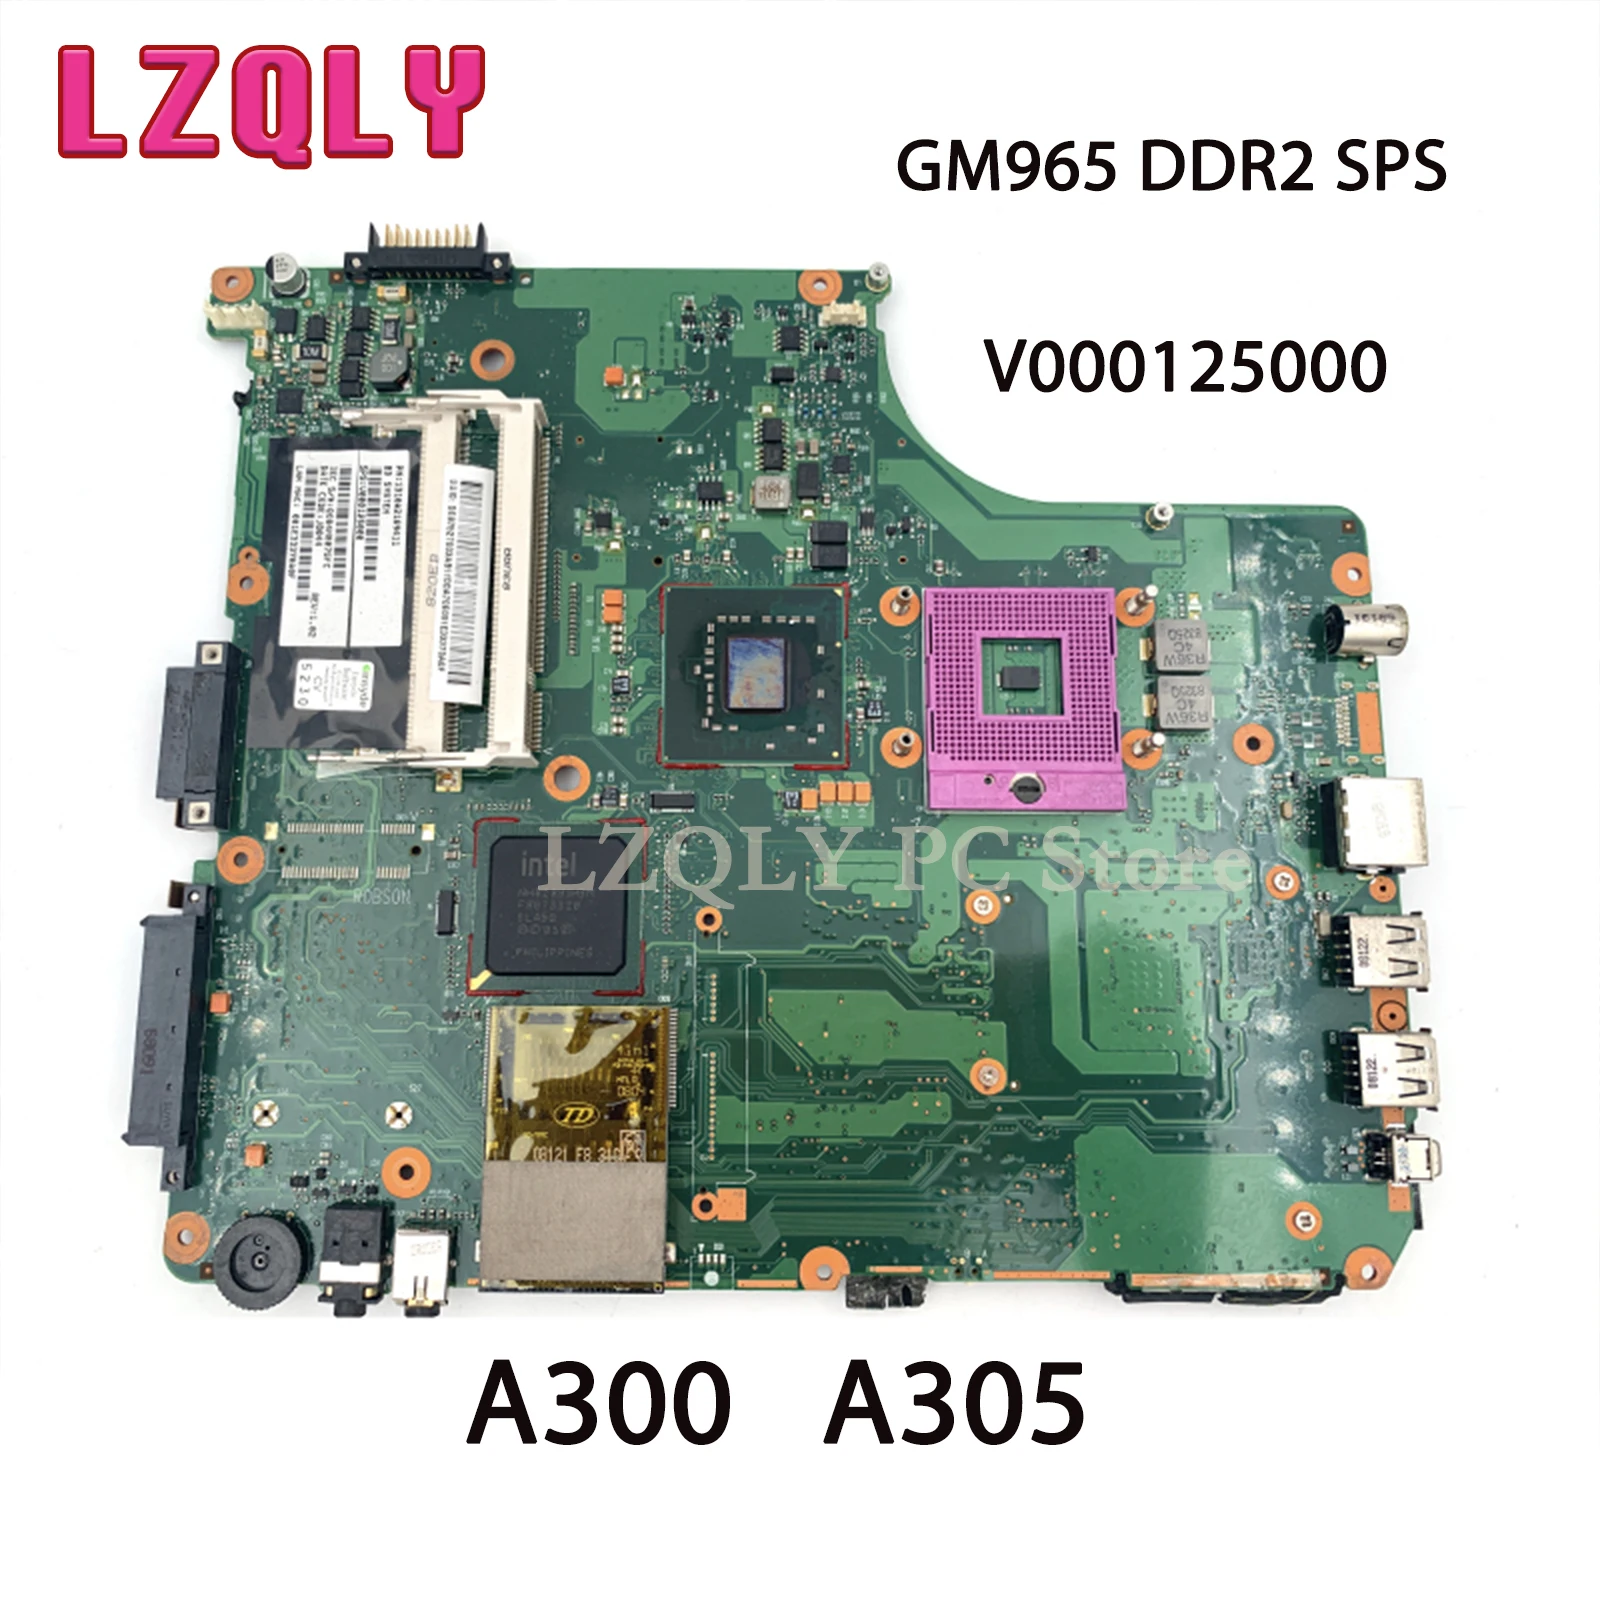 LZQLY 6050A2169401-MB-A02 V000125000 For Toshiba Satellite A300 A305 Laptop Motherboard INTEL GM965 DDR2 SPS Main Board